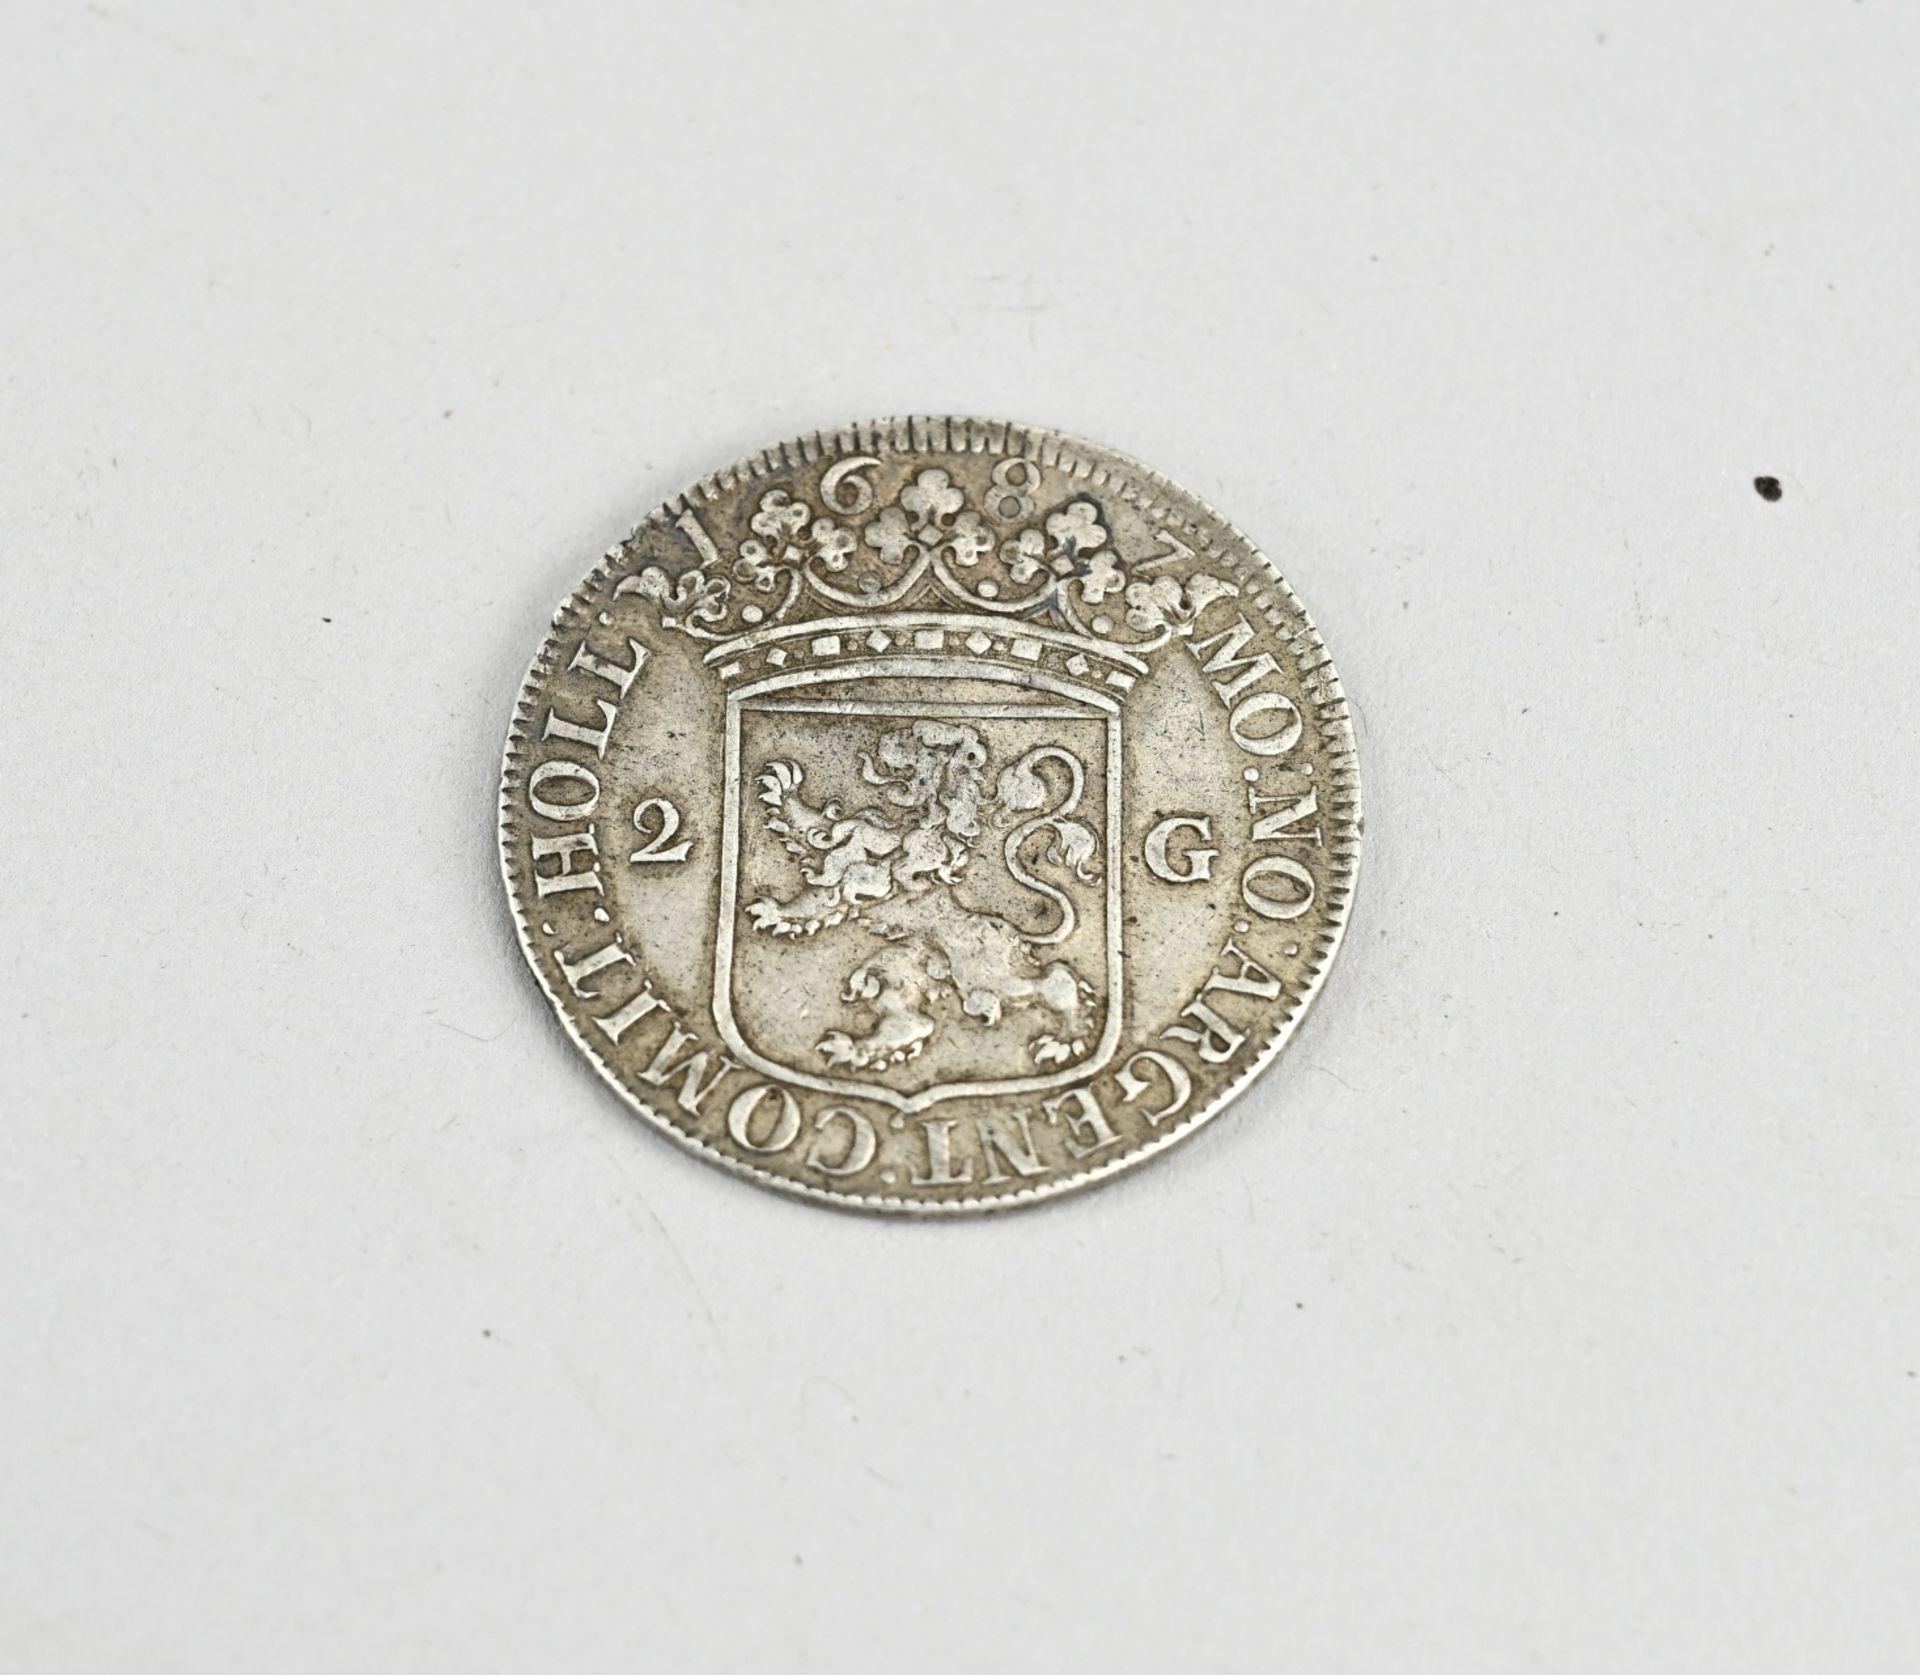 Silver 2 Guilder coin from 1687